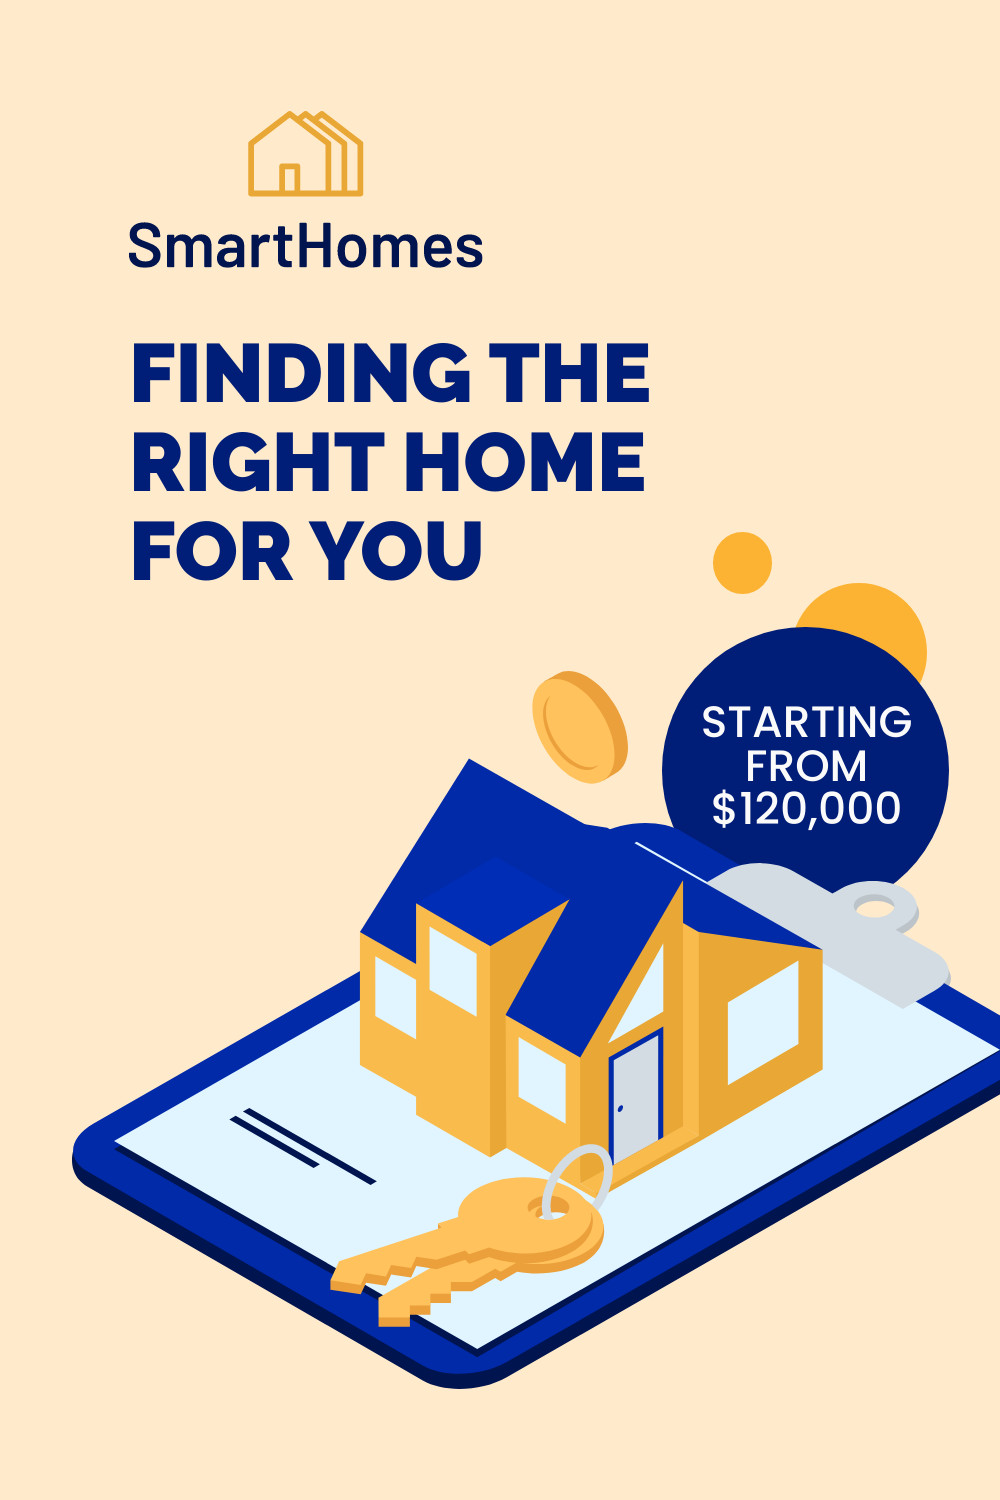 Finding The Right Home Illustration Inline Rectangle 300x250